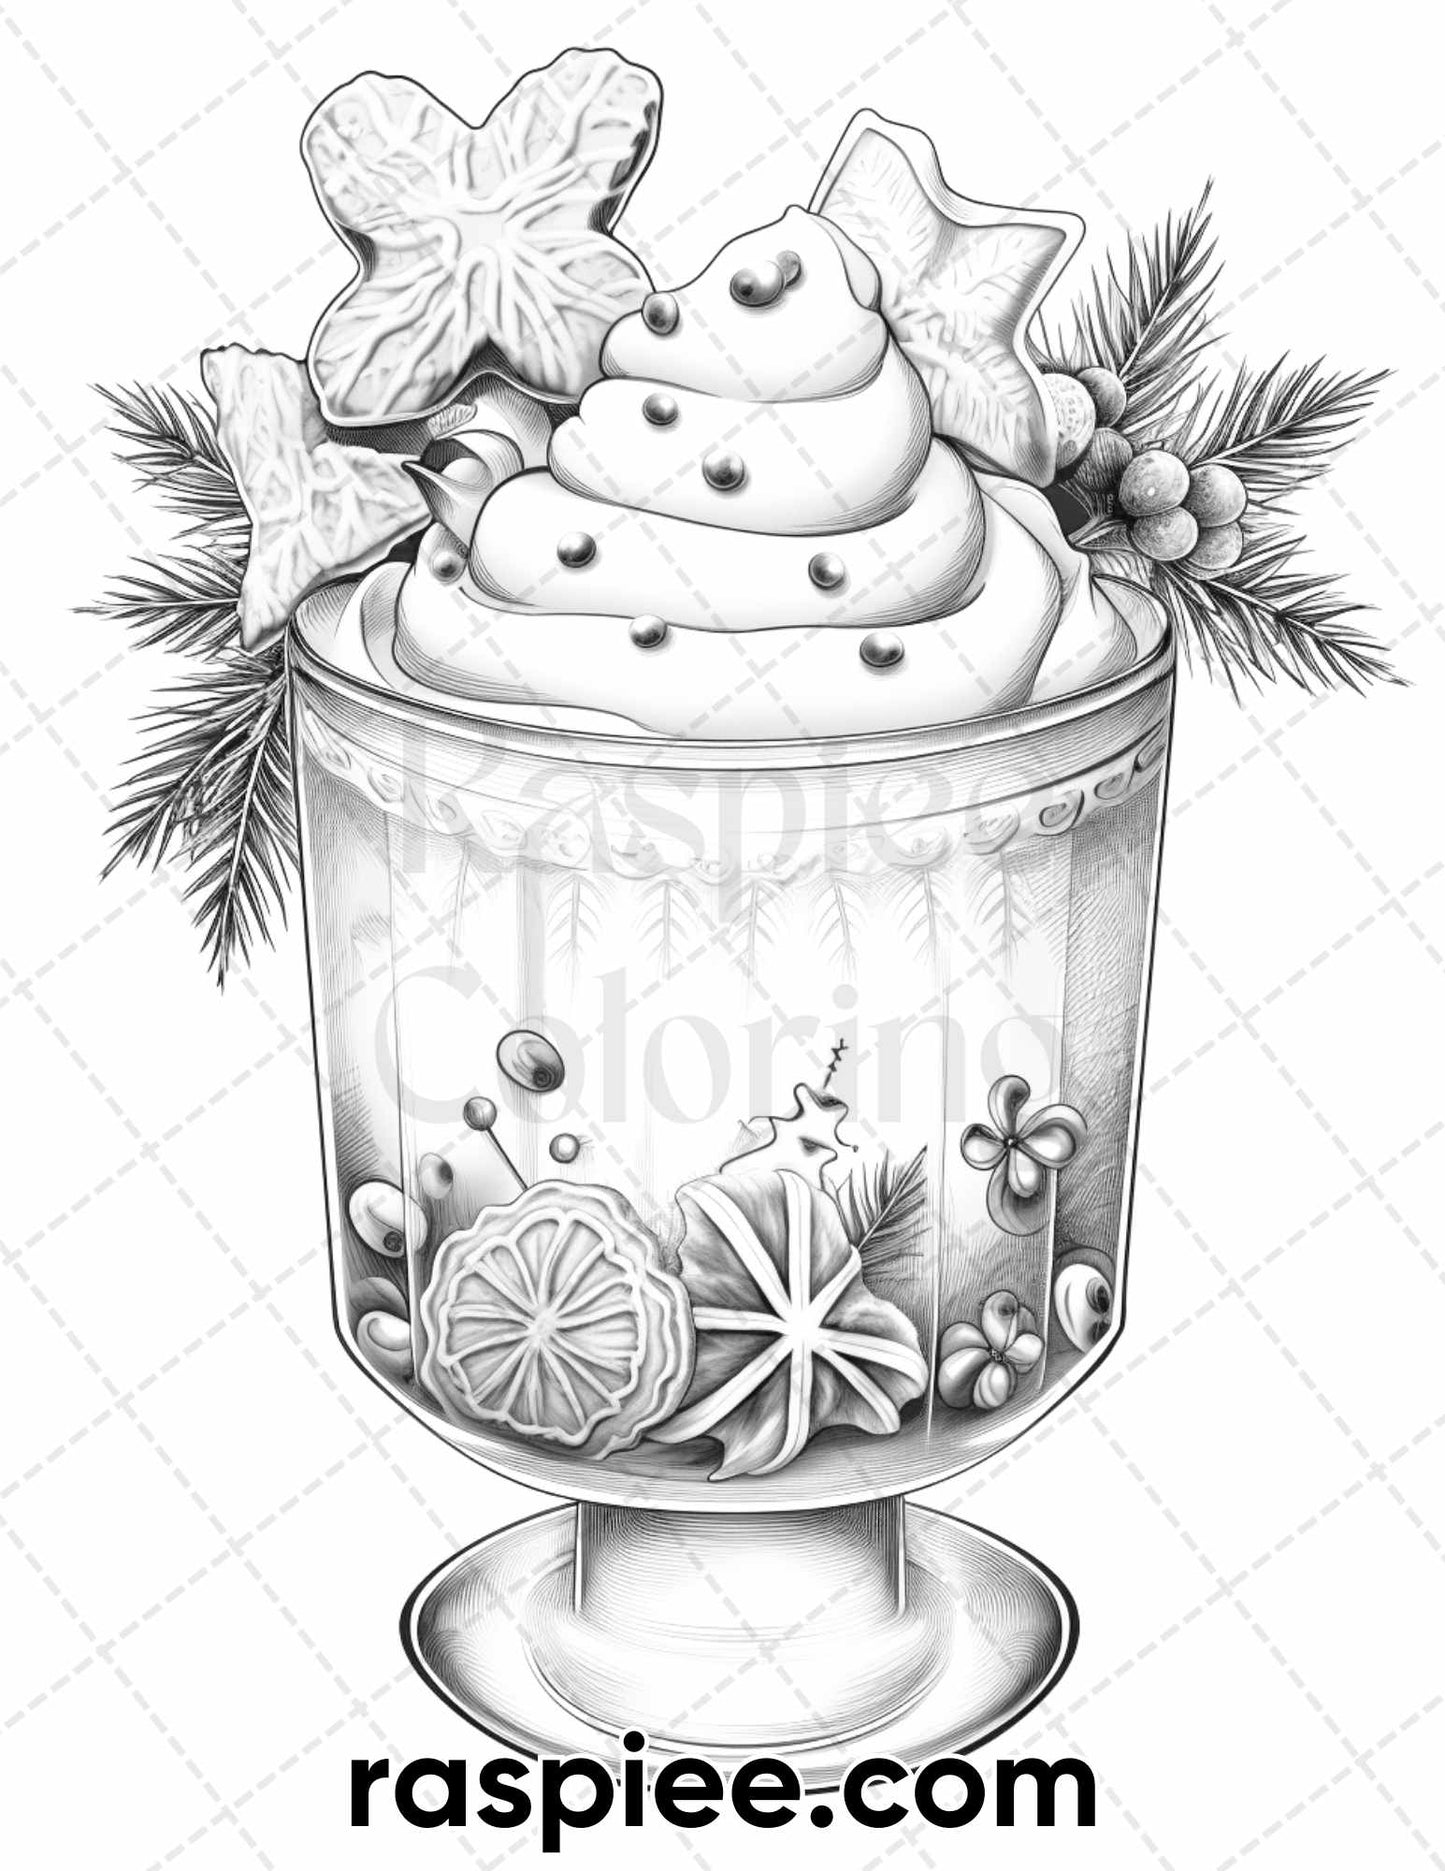 adult coloring pages, adult coloring sheets, adult coloring book pdf, adult coloring book printable, christmas coloring pages for adult, christmas coloring book for adults, holiday coloring pages for adults, xmas coloring pages, food coloring pages for adults, food coloring book for adults